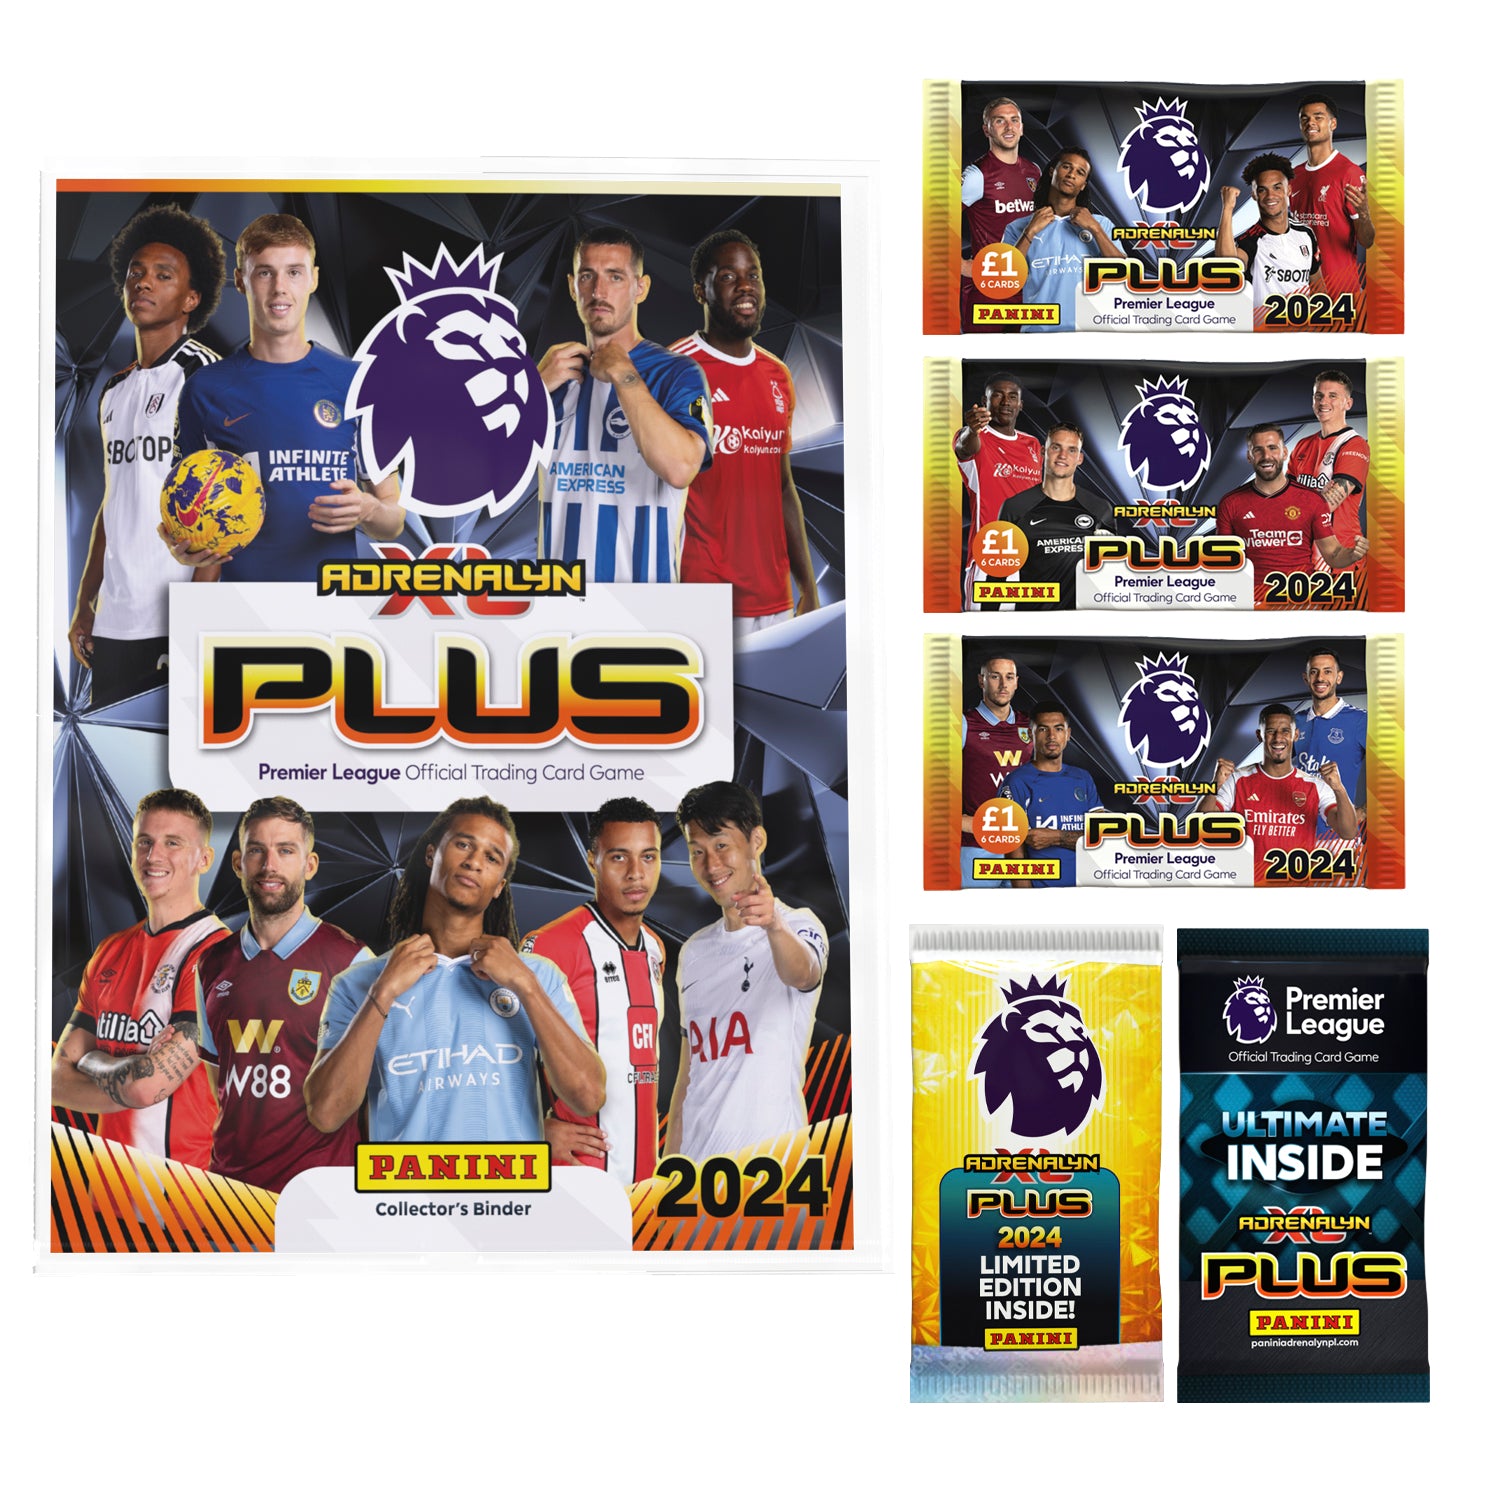 2023-24 PANINI ADRENALYN XL PLUS PREMIER LEAGUE CARDS - STARTER PACK (ALBUM, 18 CARDS + 1 LE & 1 ULTIMATE) (IN STOCK MAR 1)